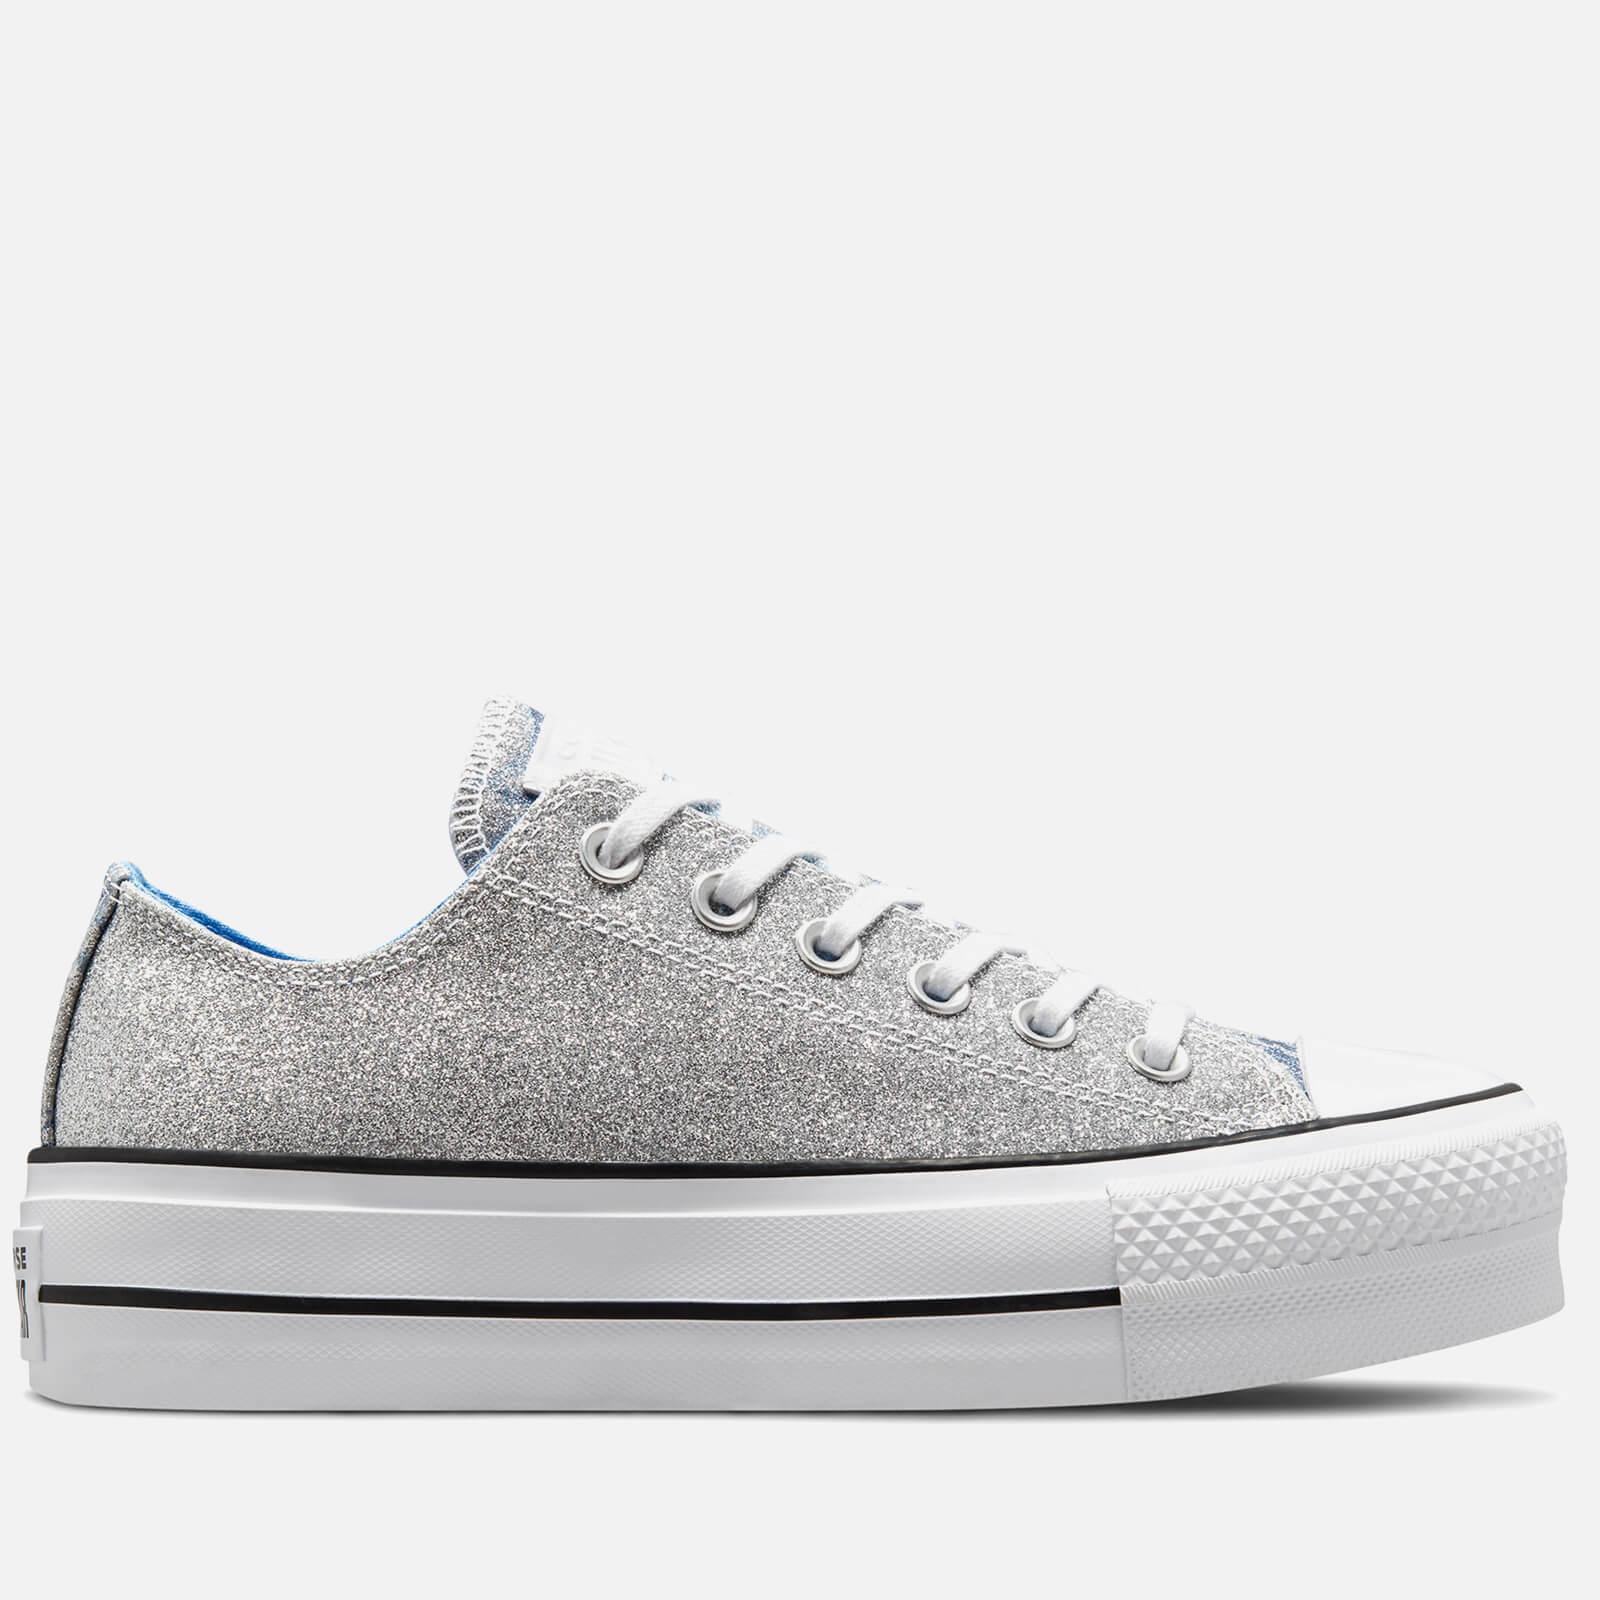 Converse Chuck Taylor All Star Hybrid Shine Lift Ox Trainers in Metallic |  Lyst